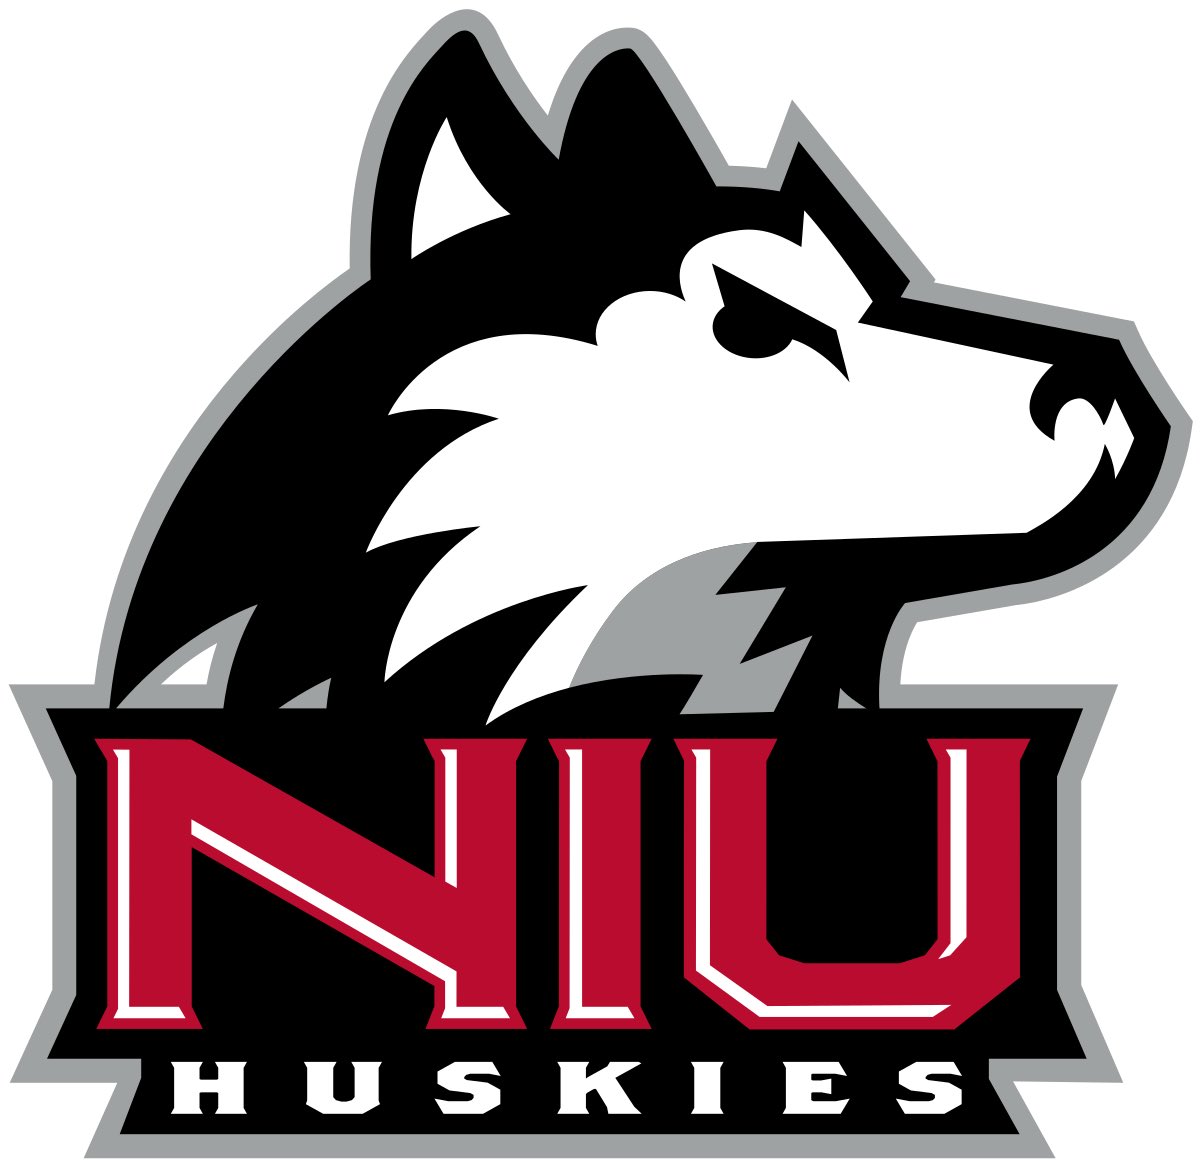 After an amazing conversation with @NIUCoachHammock, I am blessed to receive a scholarship offer from @NIU_Football! God is good! @CoachAdamBreske @Coach_CoryWhite @IndyWeOutHere @PrepRedzoneIN